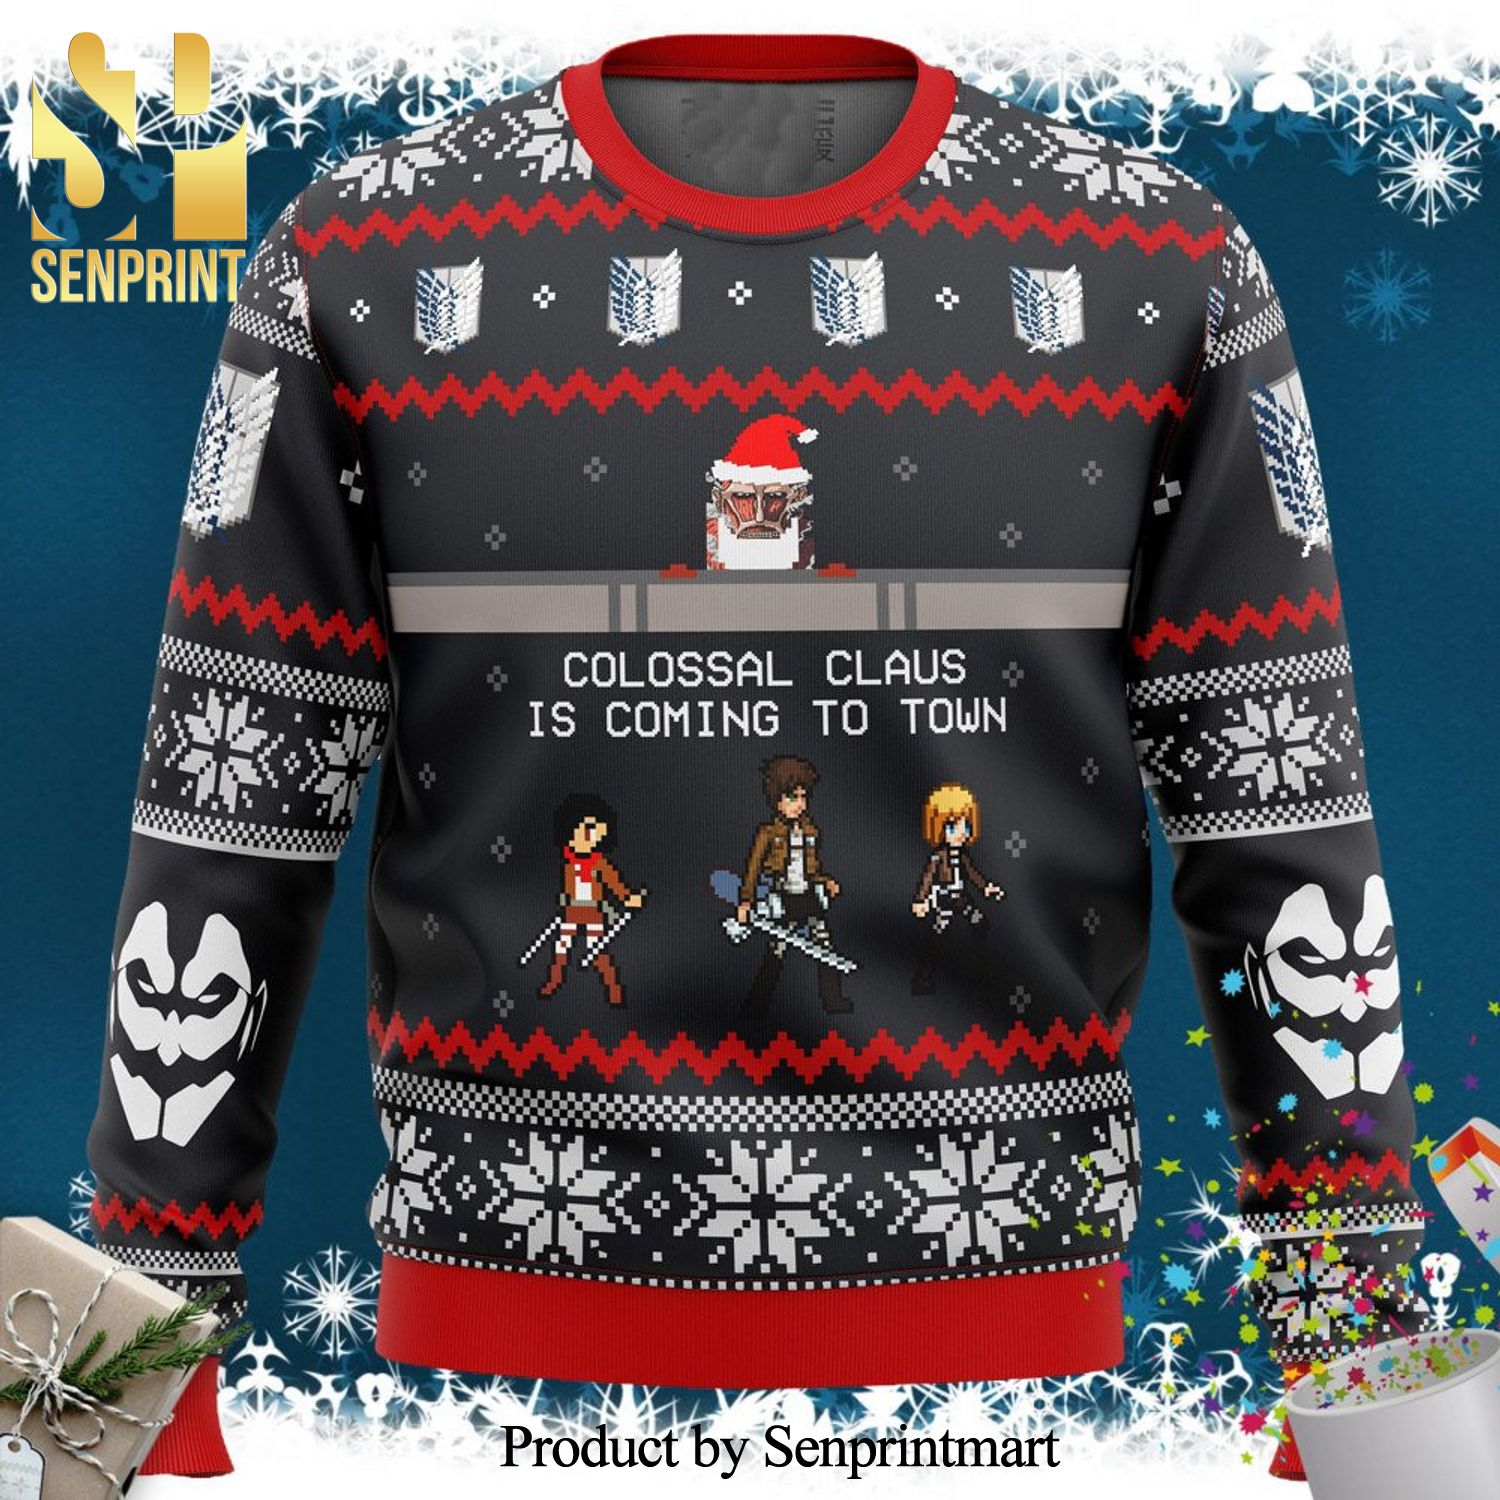 Attack on Titan Colossal Claus Manga Anime Wool Knitted Ugly Christmas Sweater